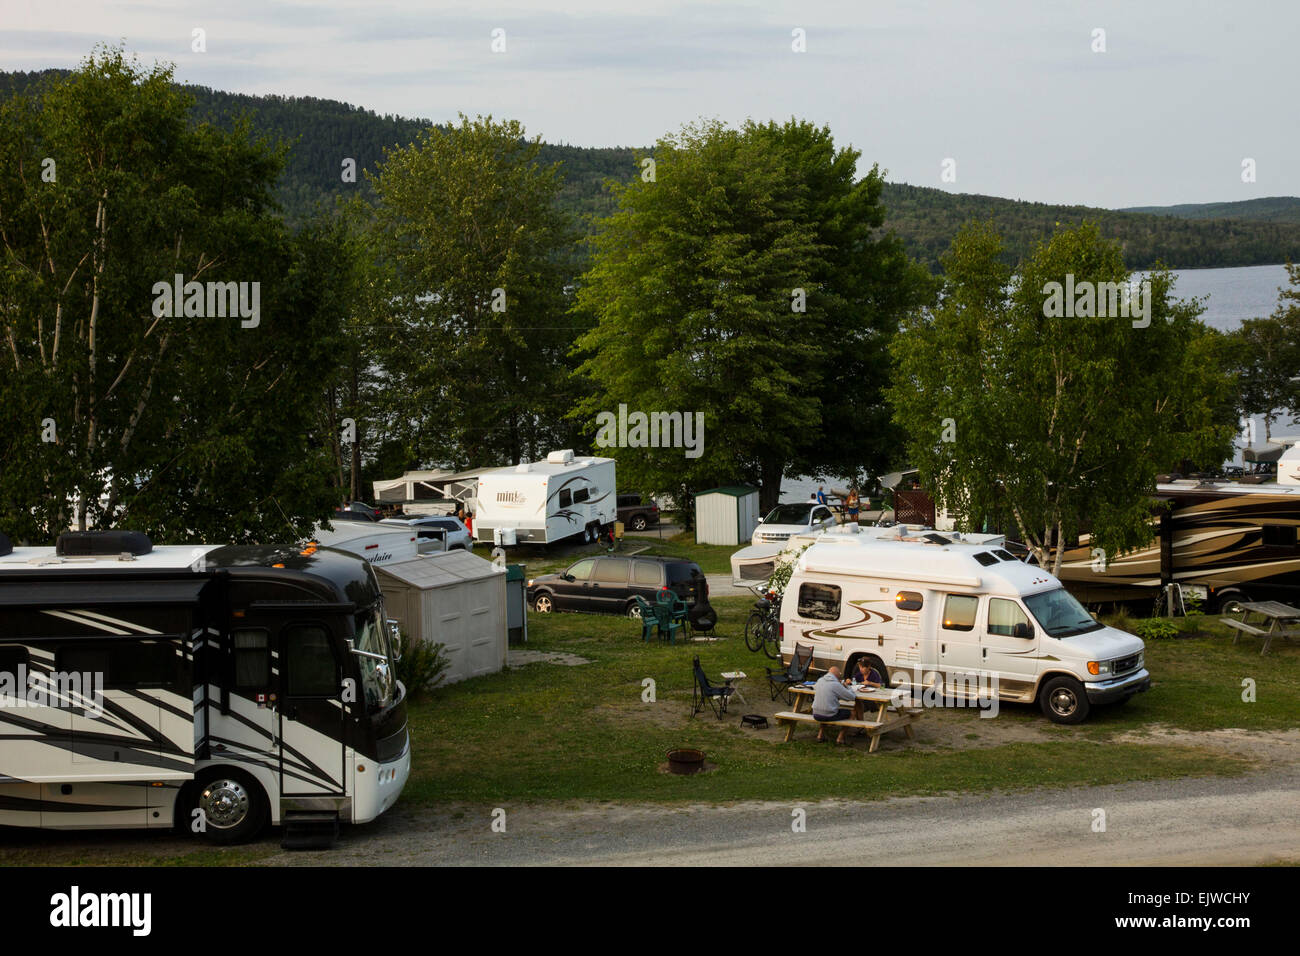 Camping Temilac has more than 100 full-service RV sites on the shores of Lake Temiscouata in Cabano, Bas-Saint-Laurent. Stock Photo